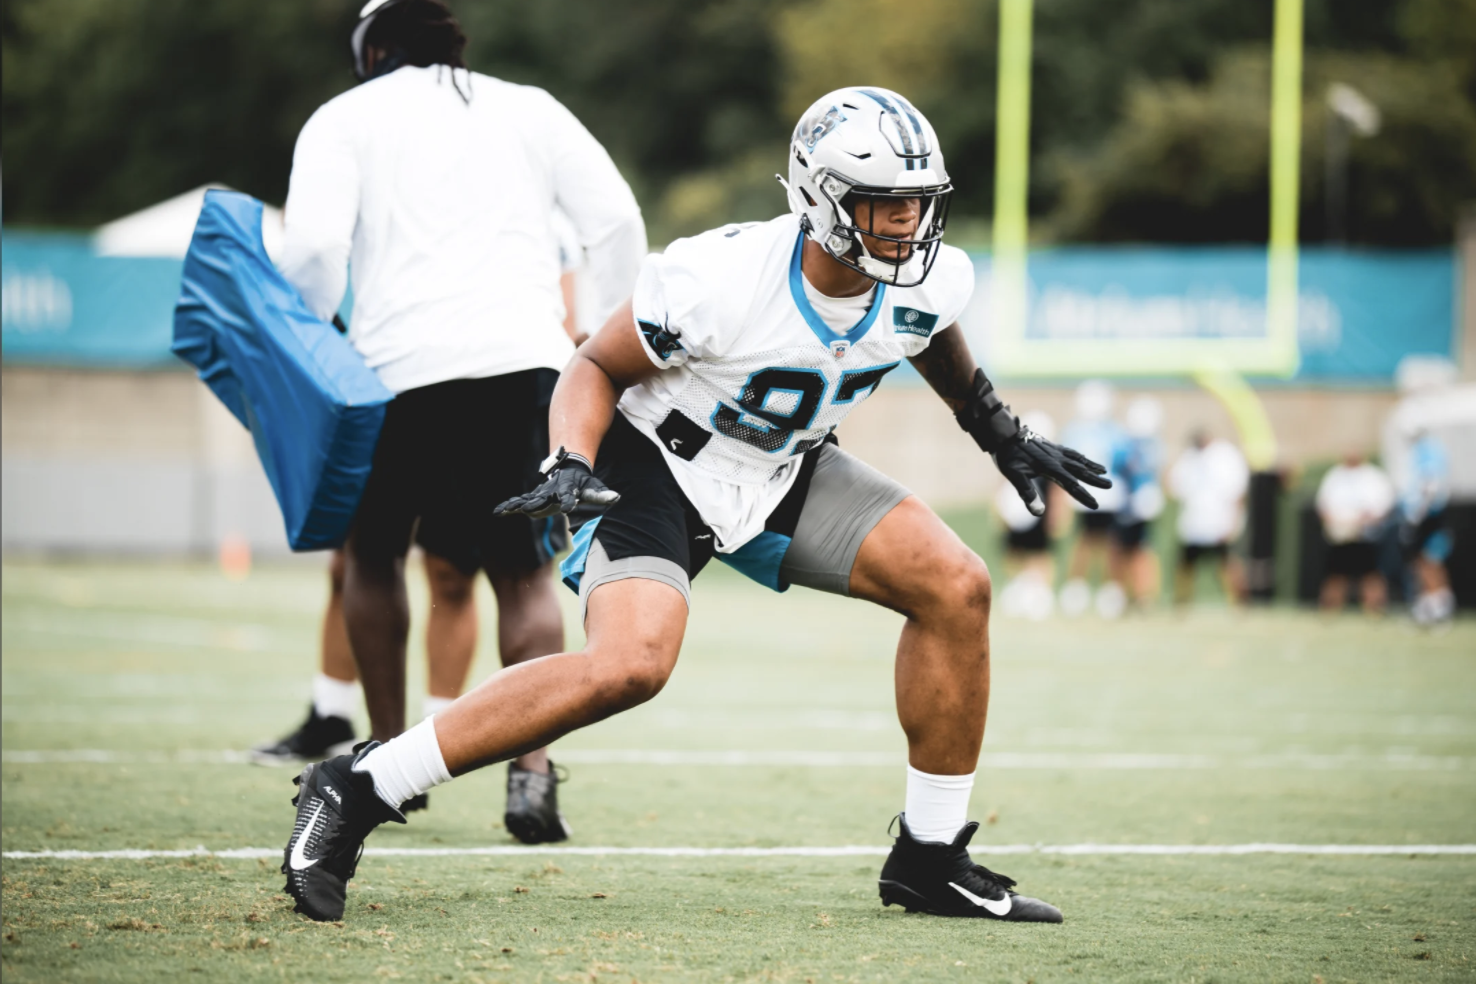 Yetur Gross-Matos Ready To Contribute On Young Panthers Defense